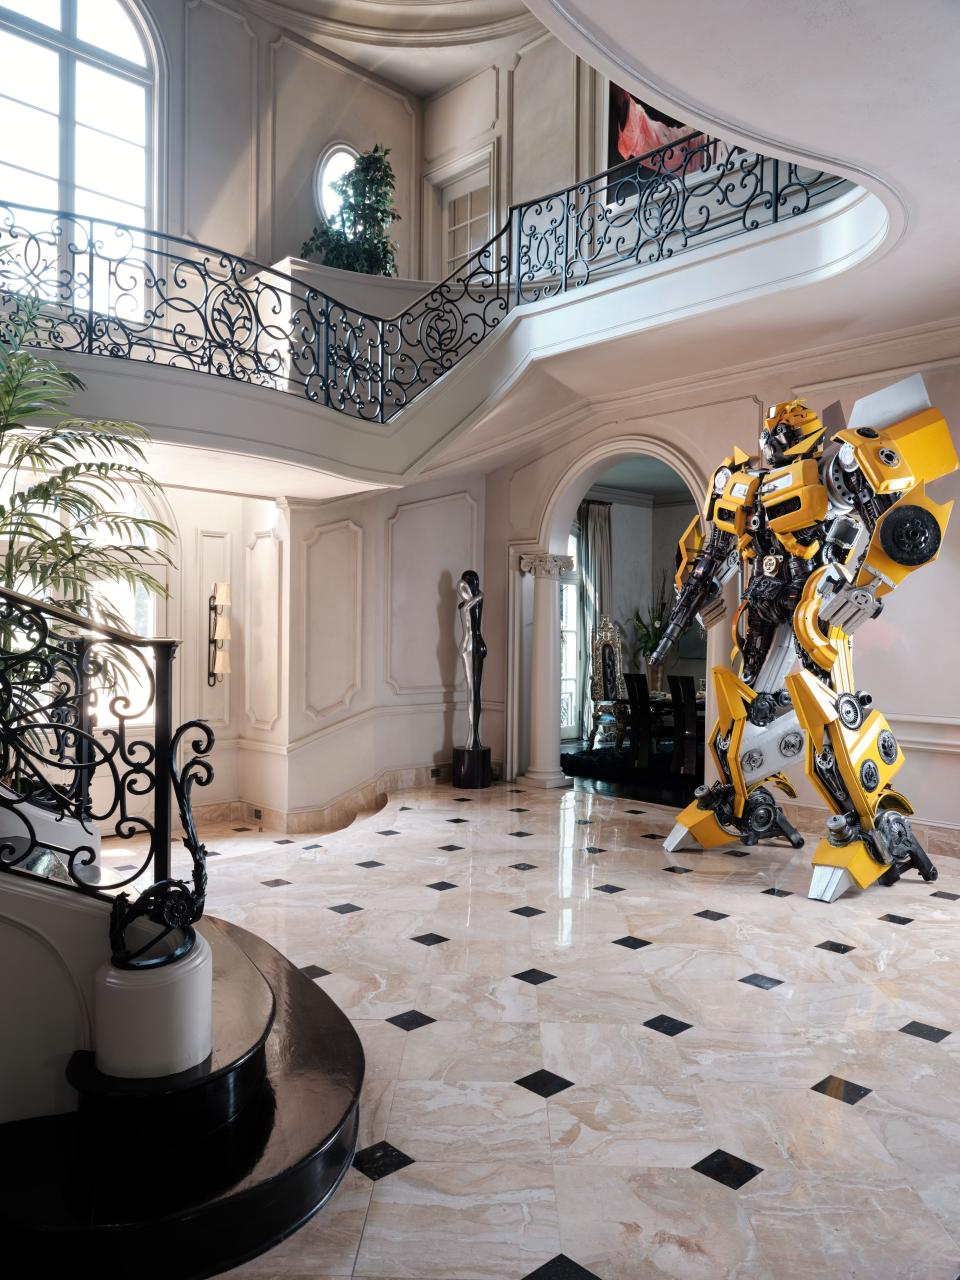 The marble entrance with frame moldings and a filigreed staircase railing came with the French Chateau–style mansion in Buckhead, Atlanta. “The only thing I added was my Bumblebee!” says the owner, actor Tyrese Gibson, who purchased the Transformer sculptures for what will eventually be Voltron Studios Hollywood, a full-service film studio he is building in Atlanta. “The kids and the adults love Bumblebee and Optimus Prime. They are such random things to see, and they are like 16 feet tall.”